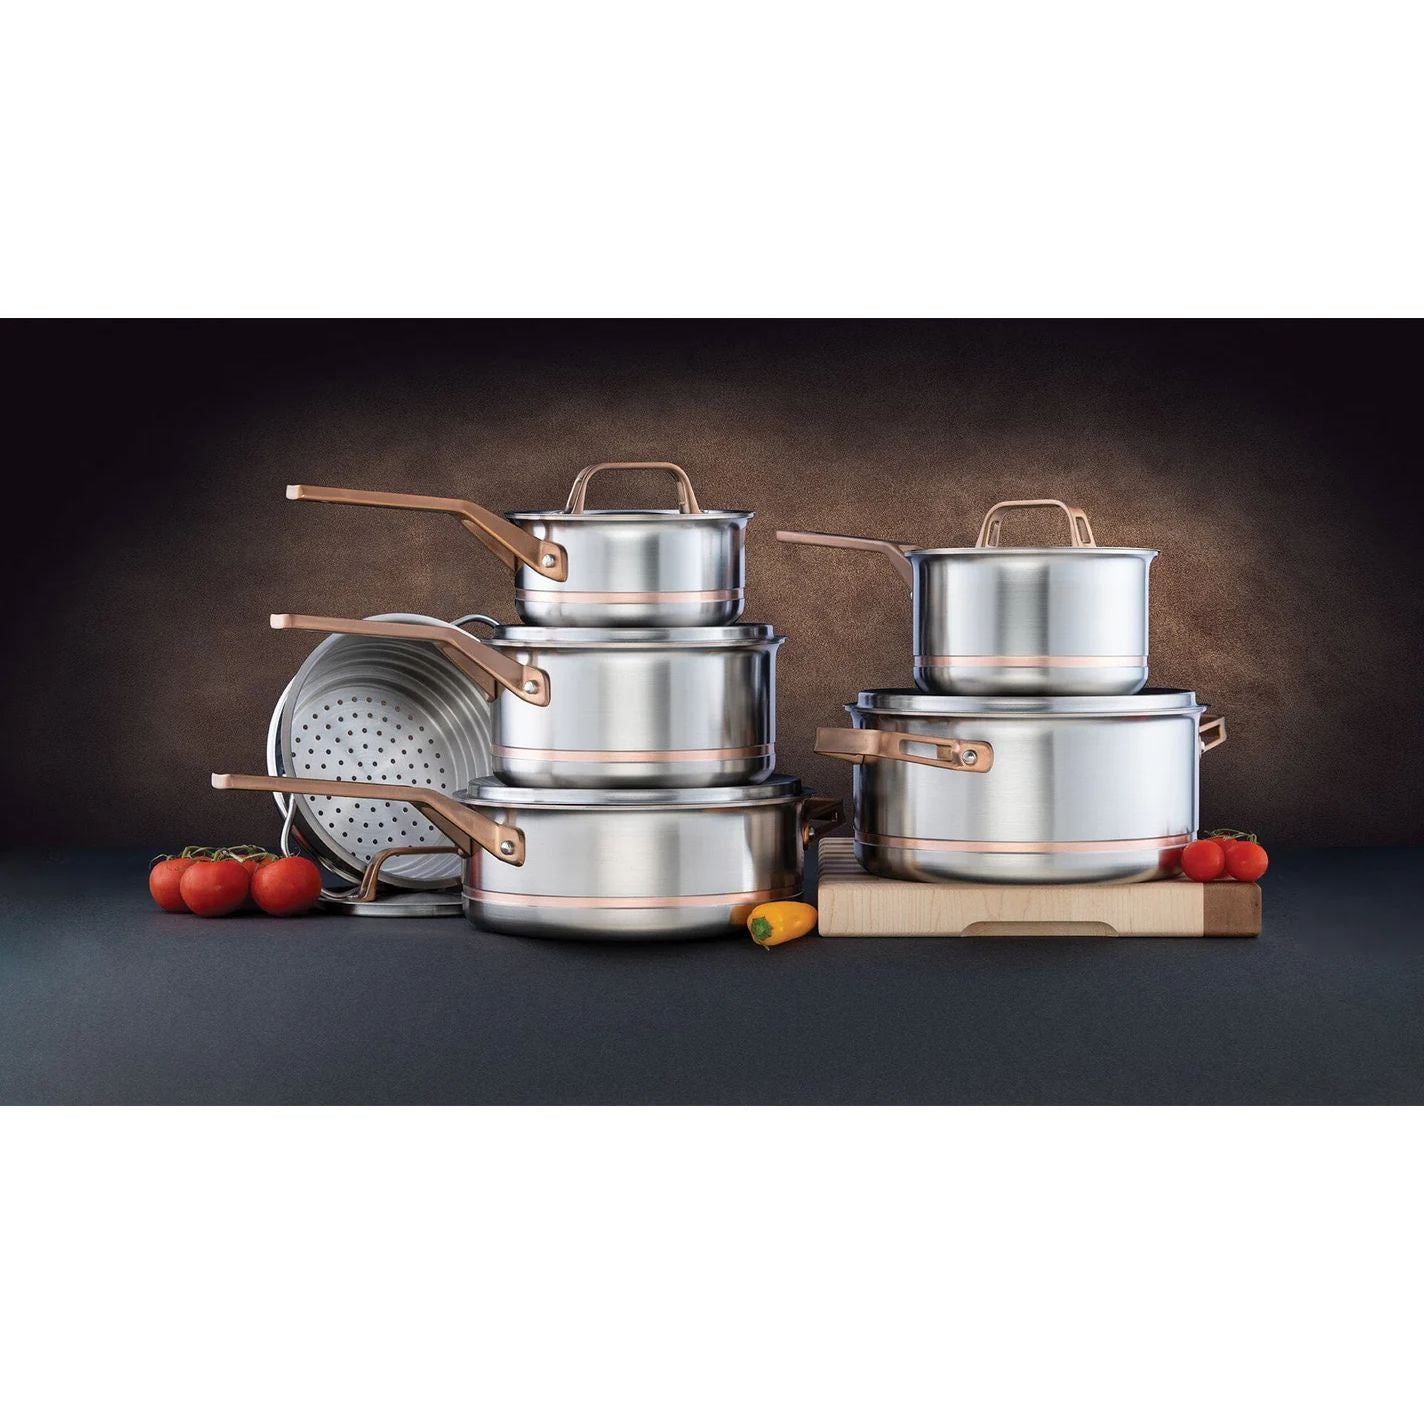 Meyer Copper Clad 5-Ply Copper Core Stainless Steel Cookware Set 12-Piece Made in Canada